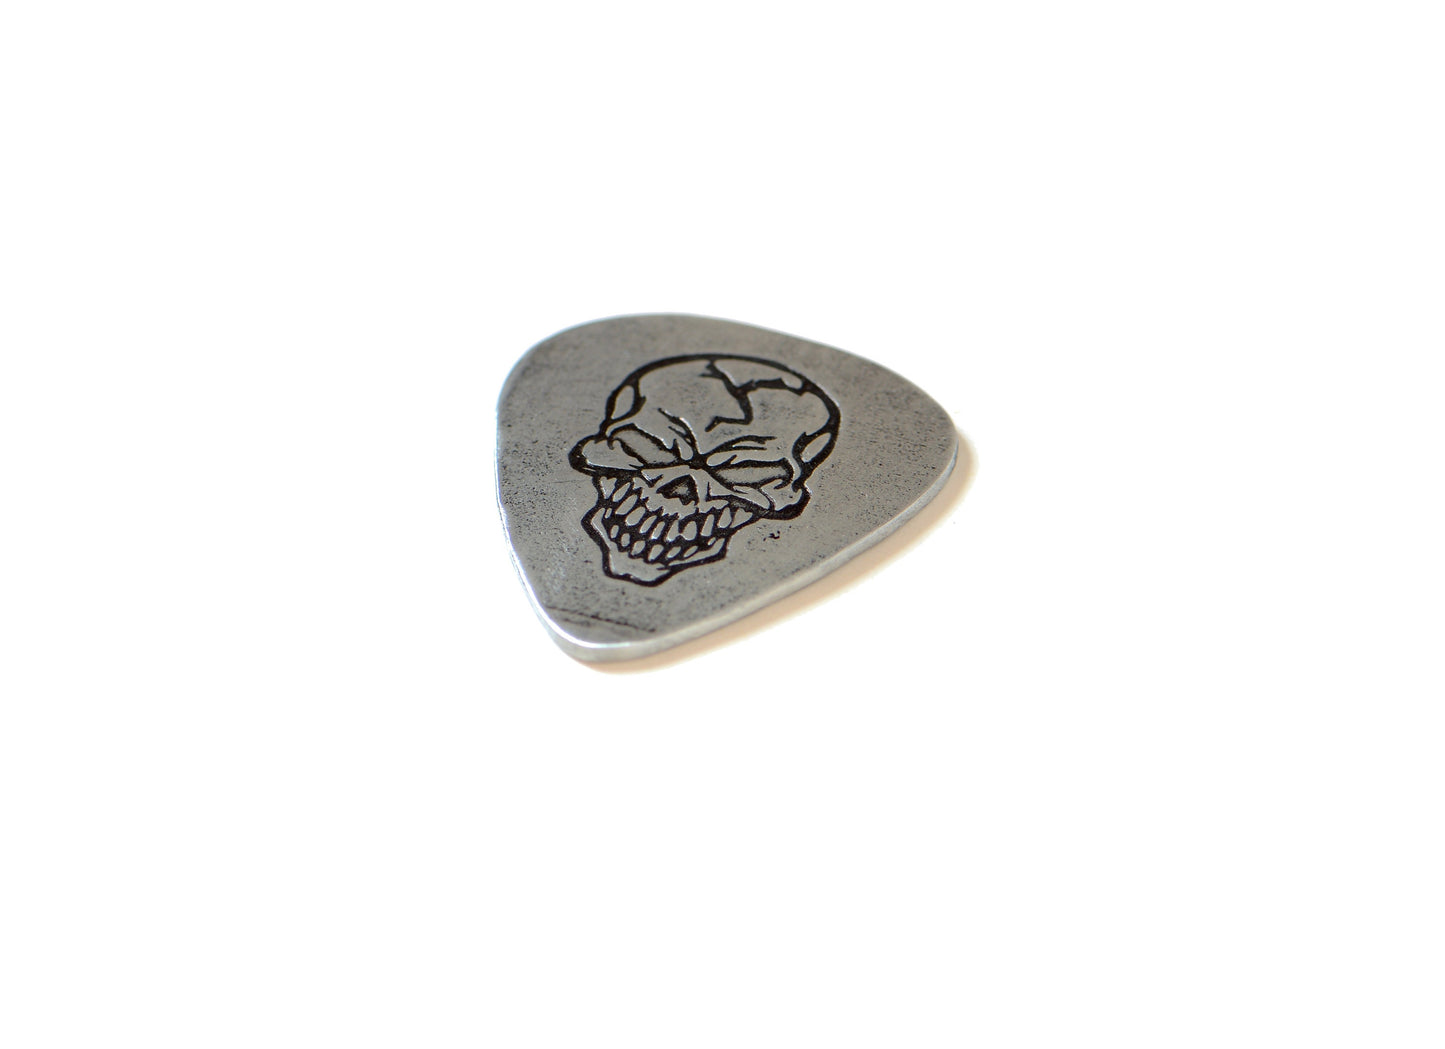 Sterling silver guitar pick with skull design